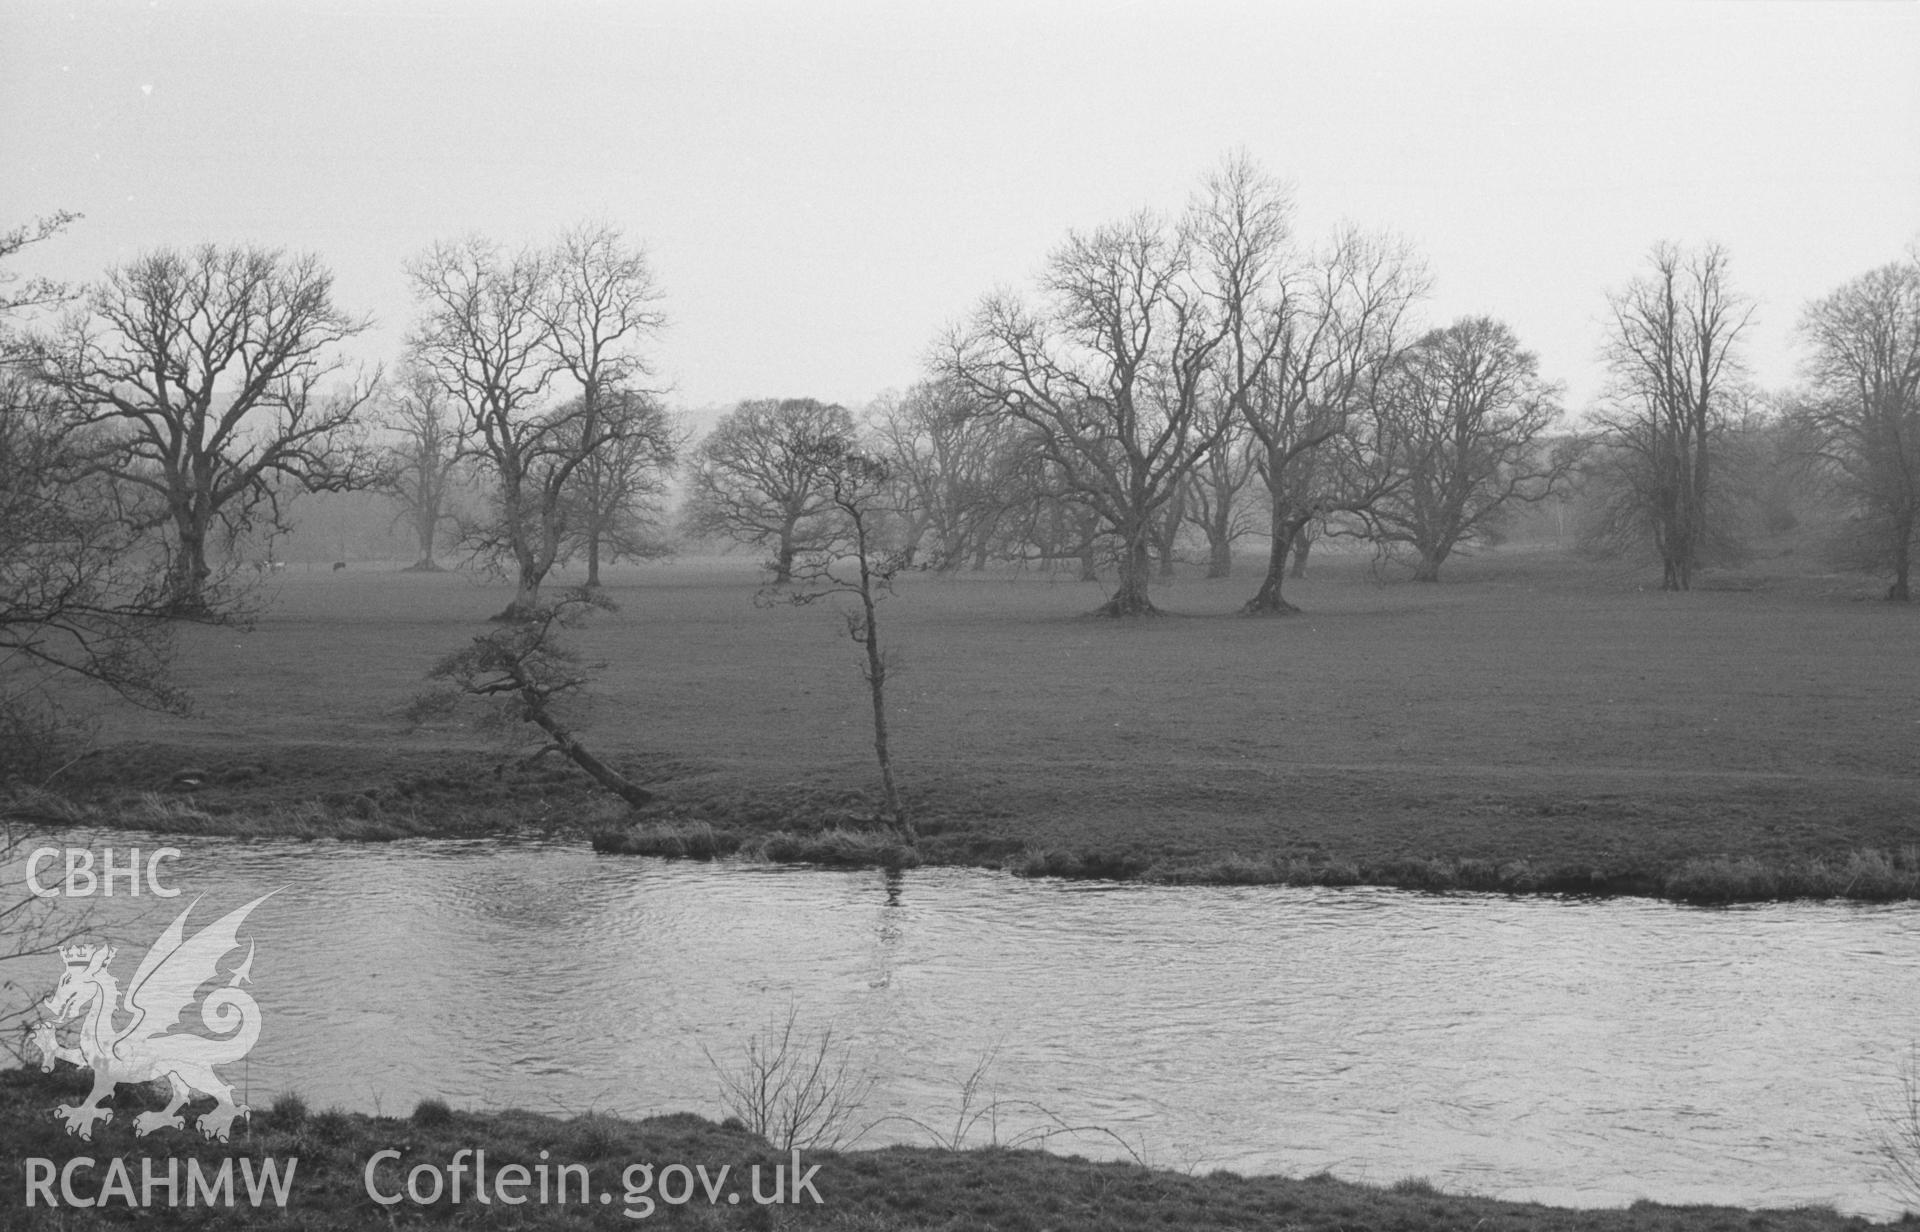 Digital copy of a black and white negative showing view looking across the river Teifi towards Highmead heronry, Llanybydder. Photographed by Arthur O. Chater in April 1966.